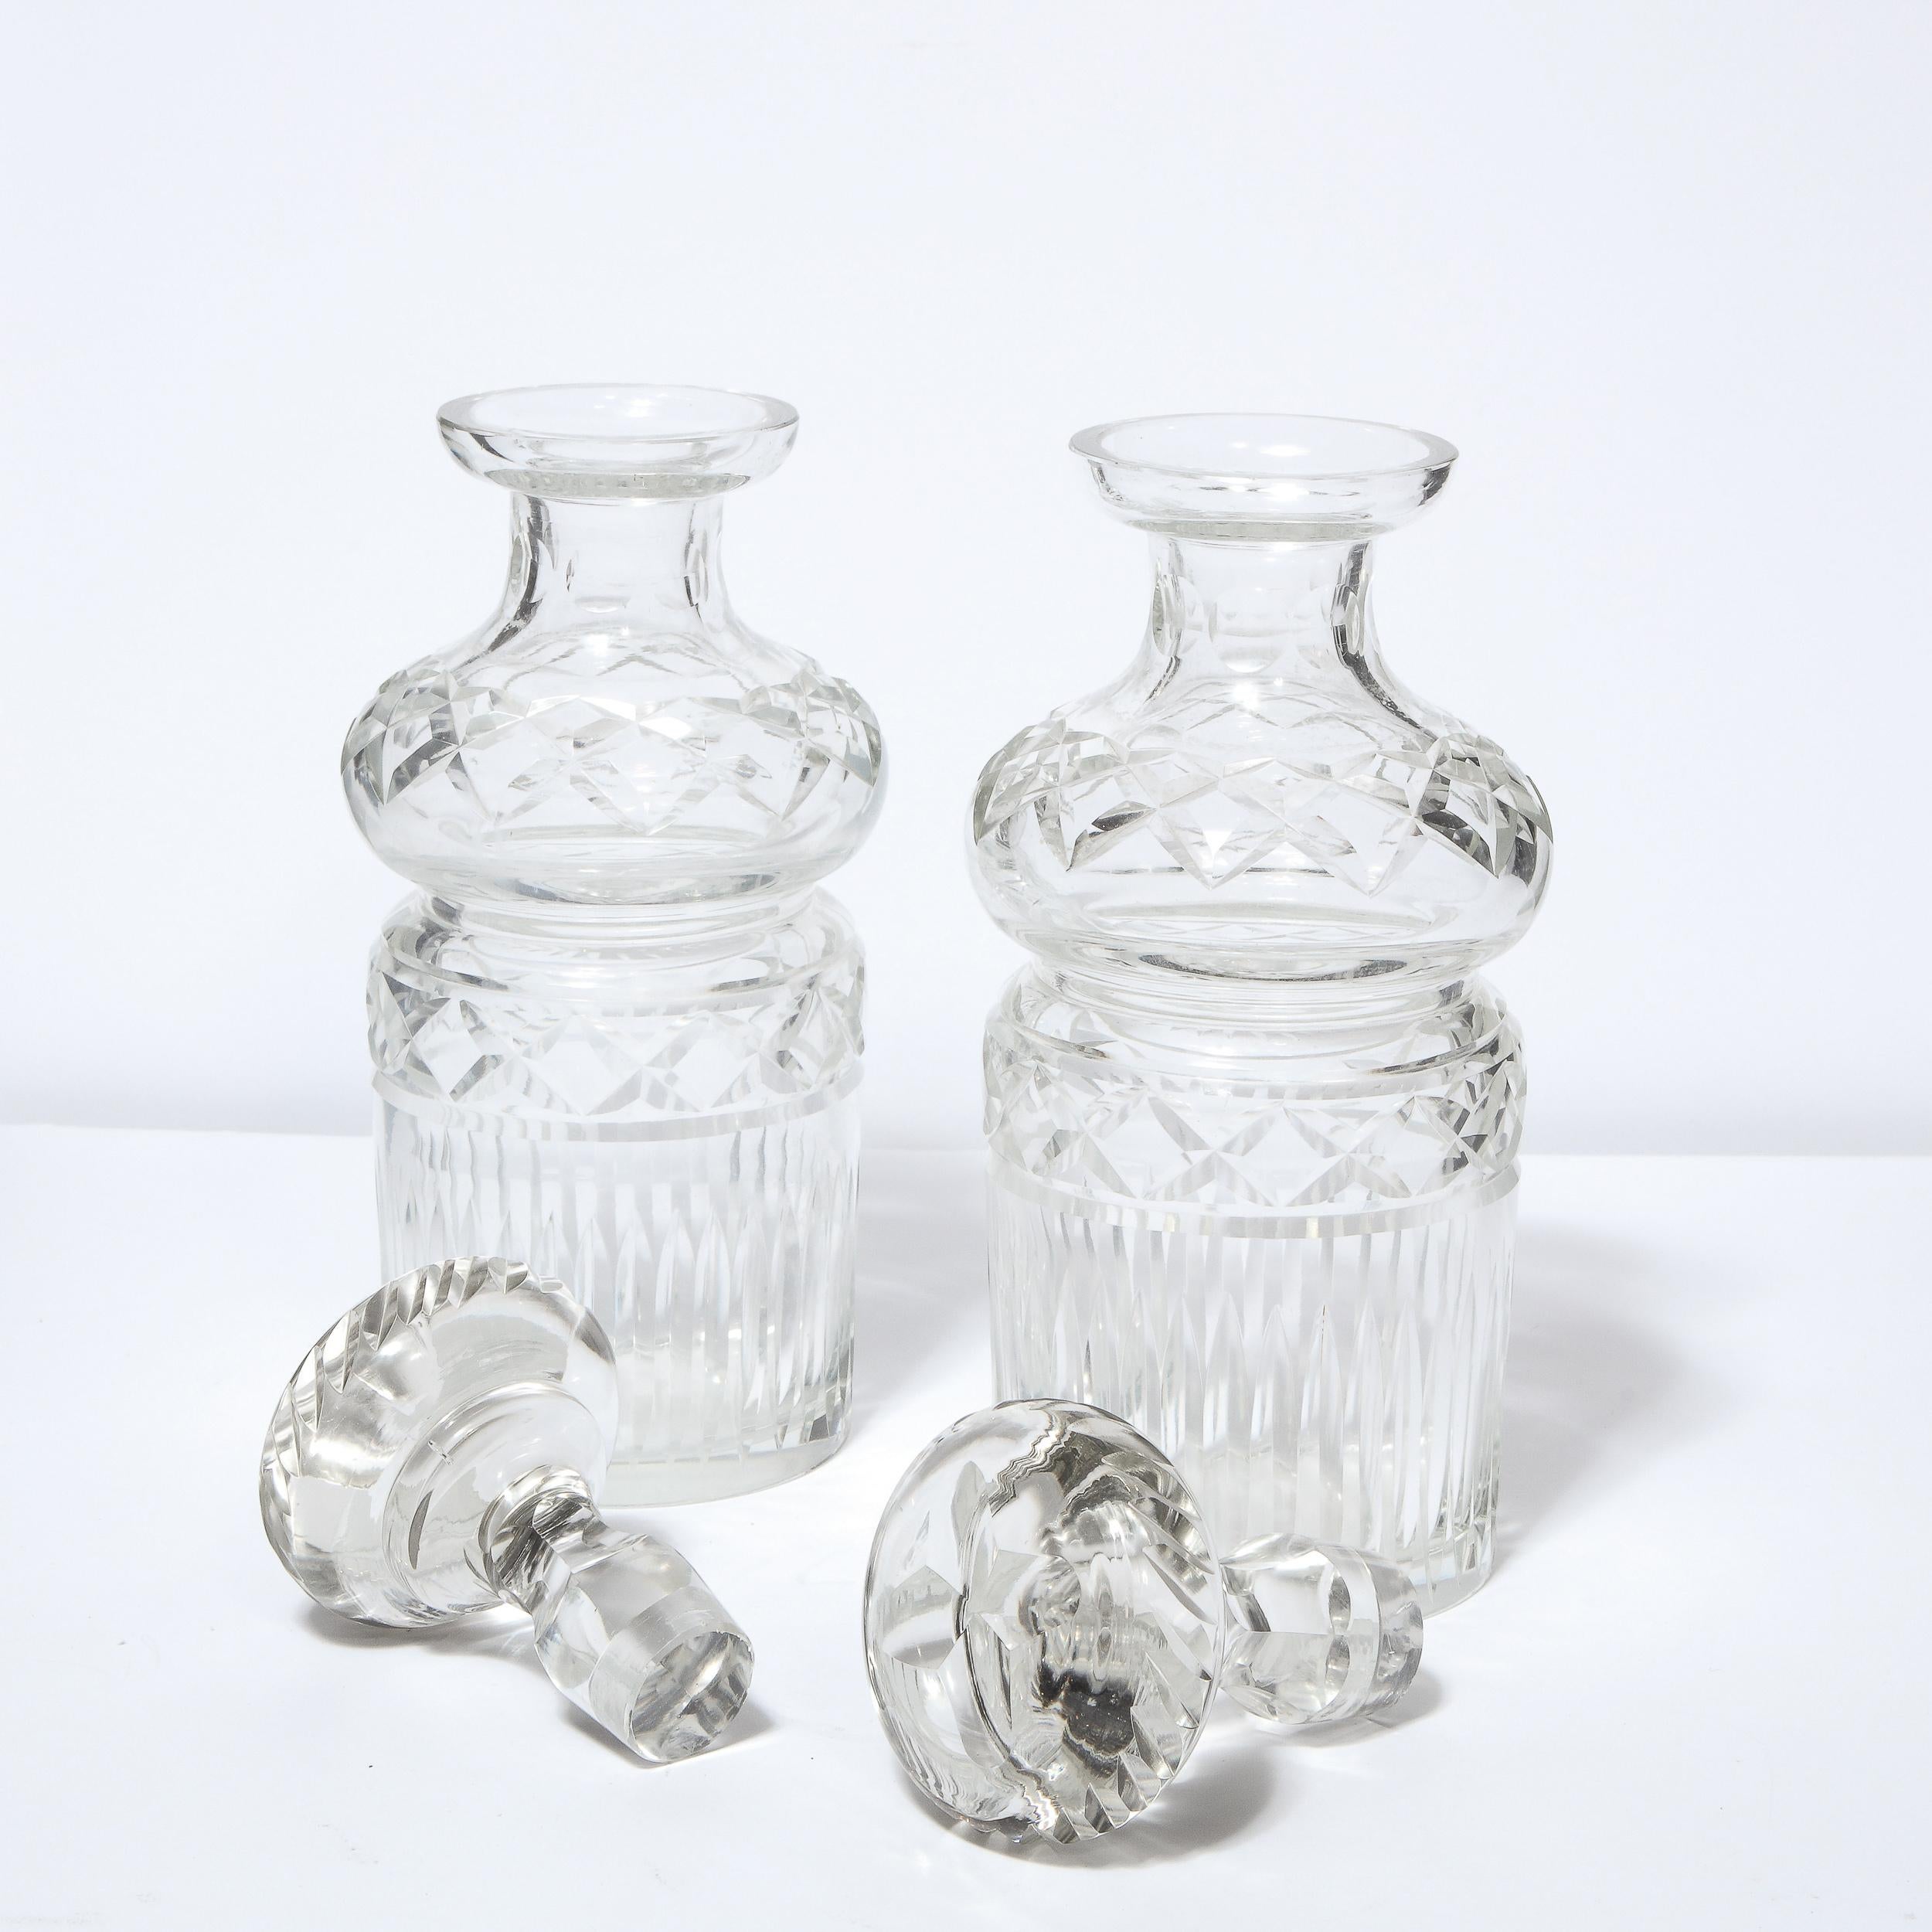 Pair of Mid-Century Modern Etched Translucent Crystal Decanters 3